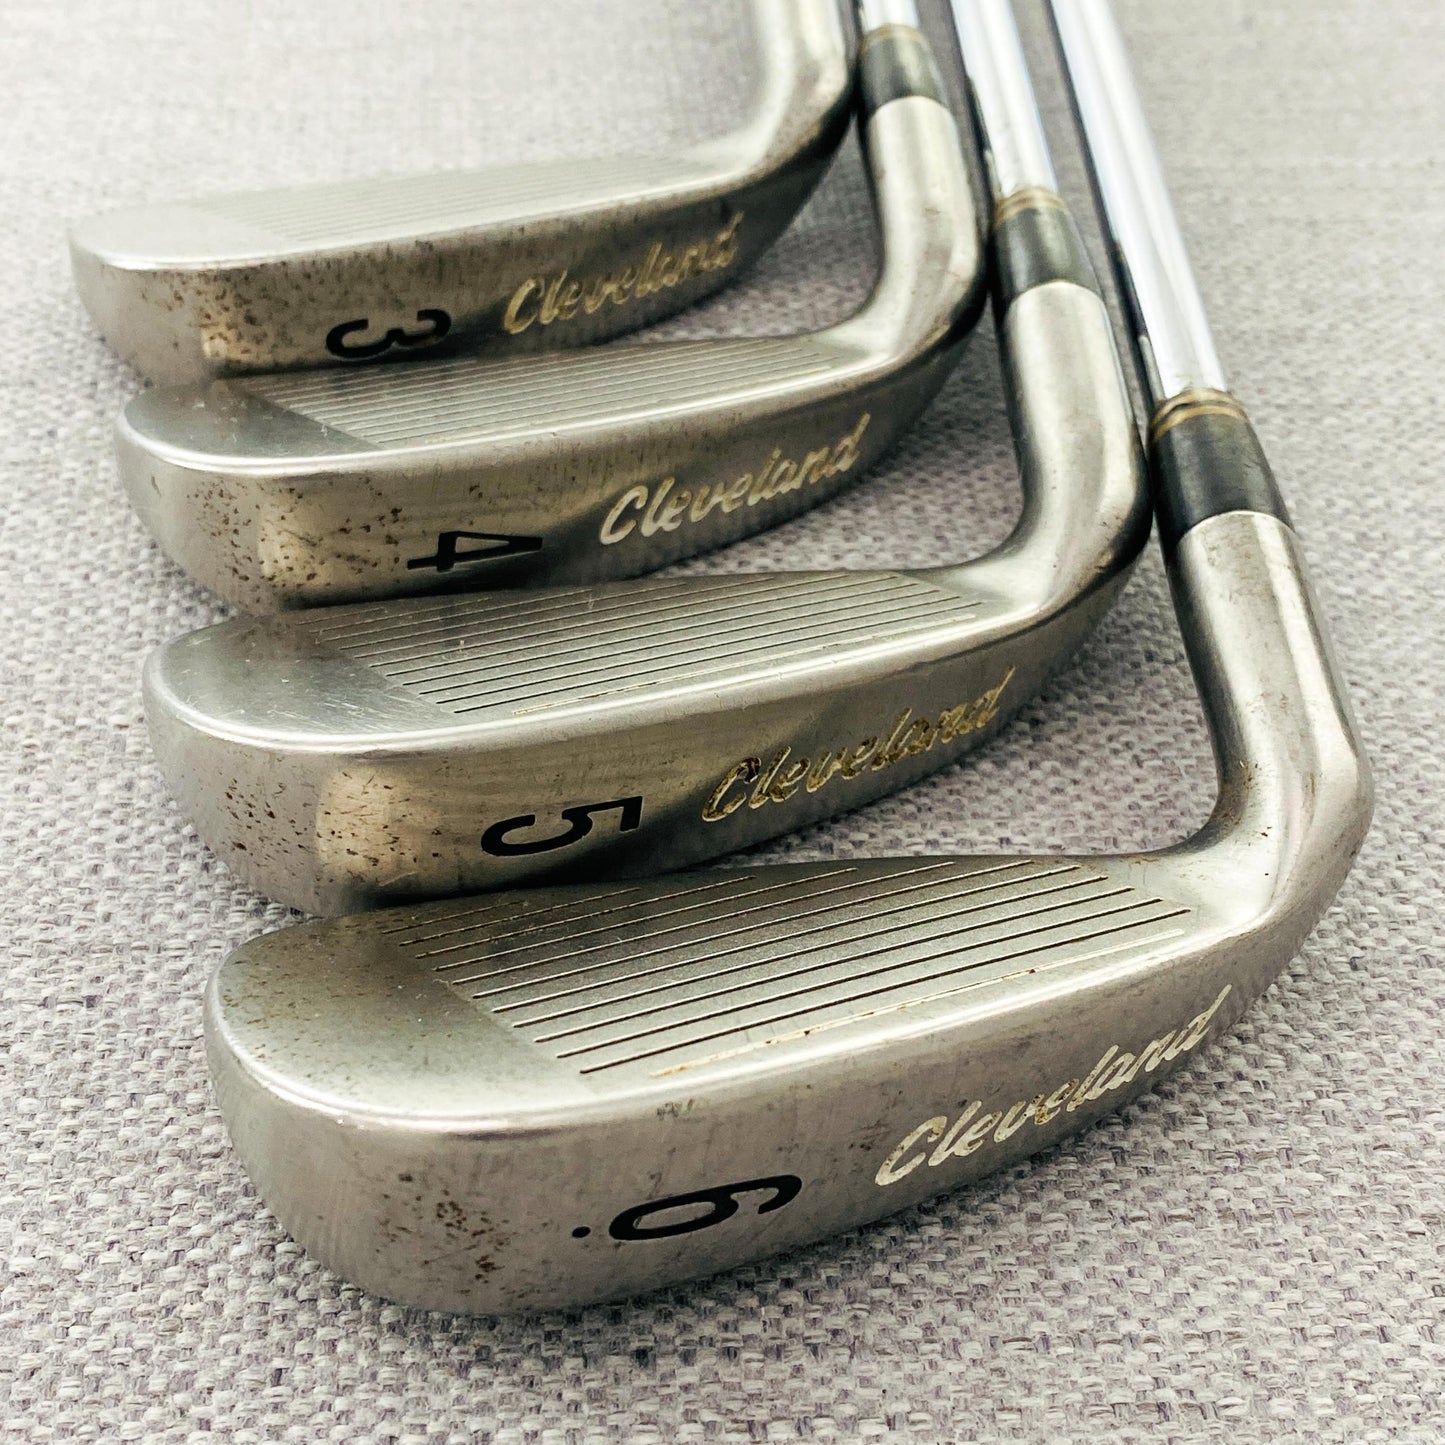 Cleveland Tour Action 5 (TA5) Single Iron. Sold Separately. Regular Flex Steel - Good Condition # 13654